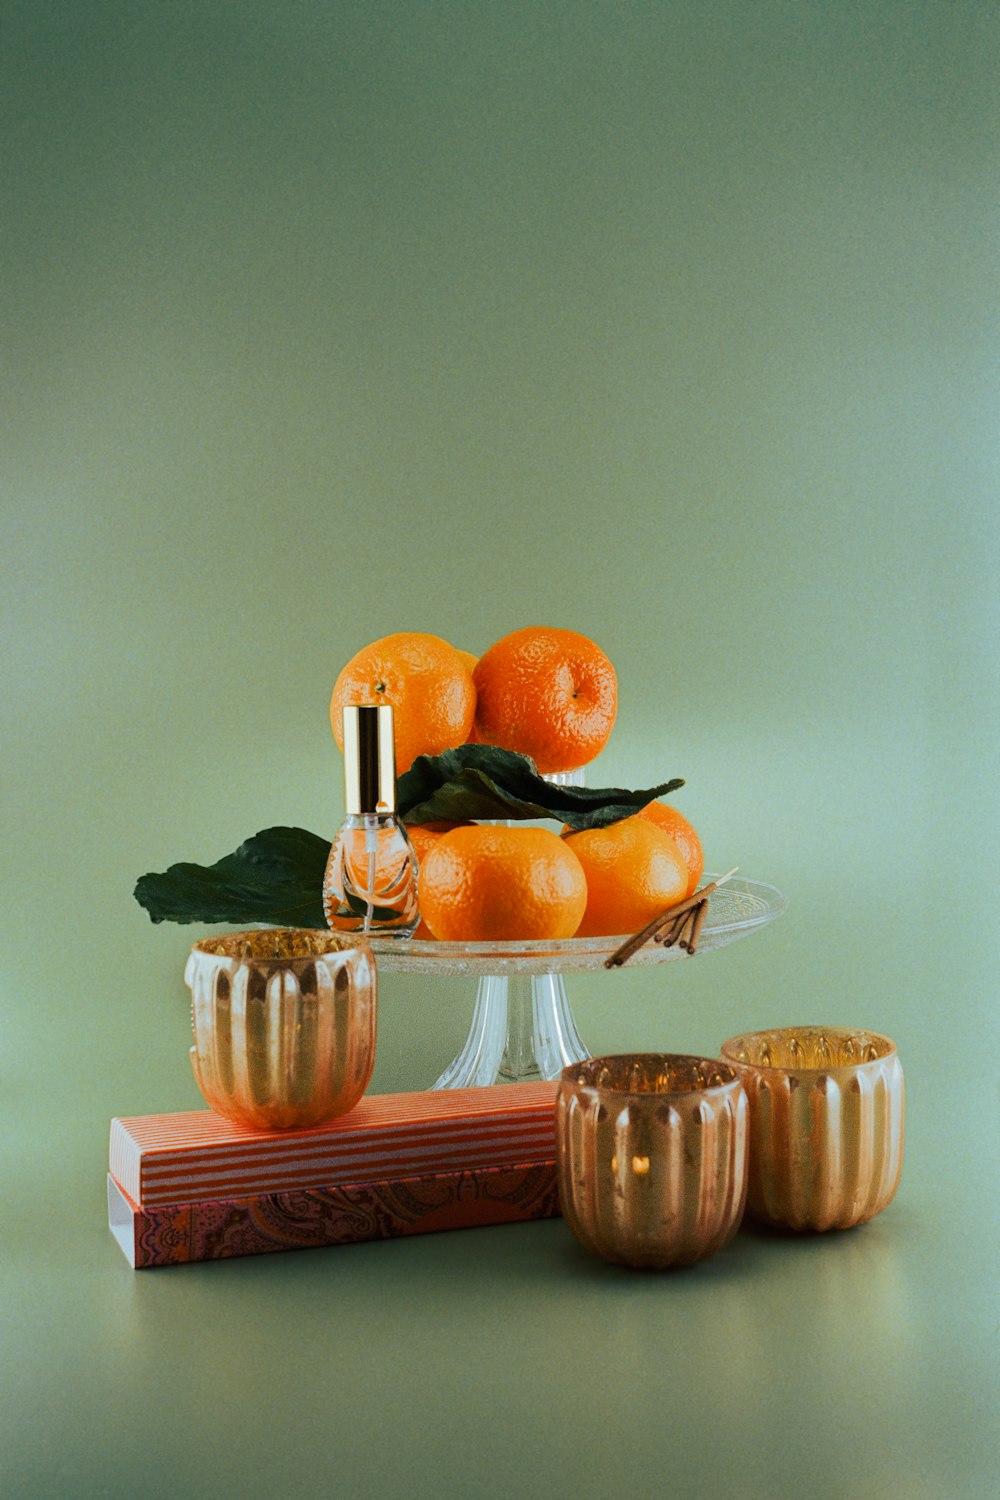 a glass bowl filled with oranges next to a stack of oranges